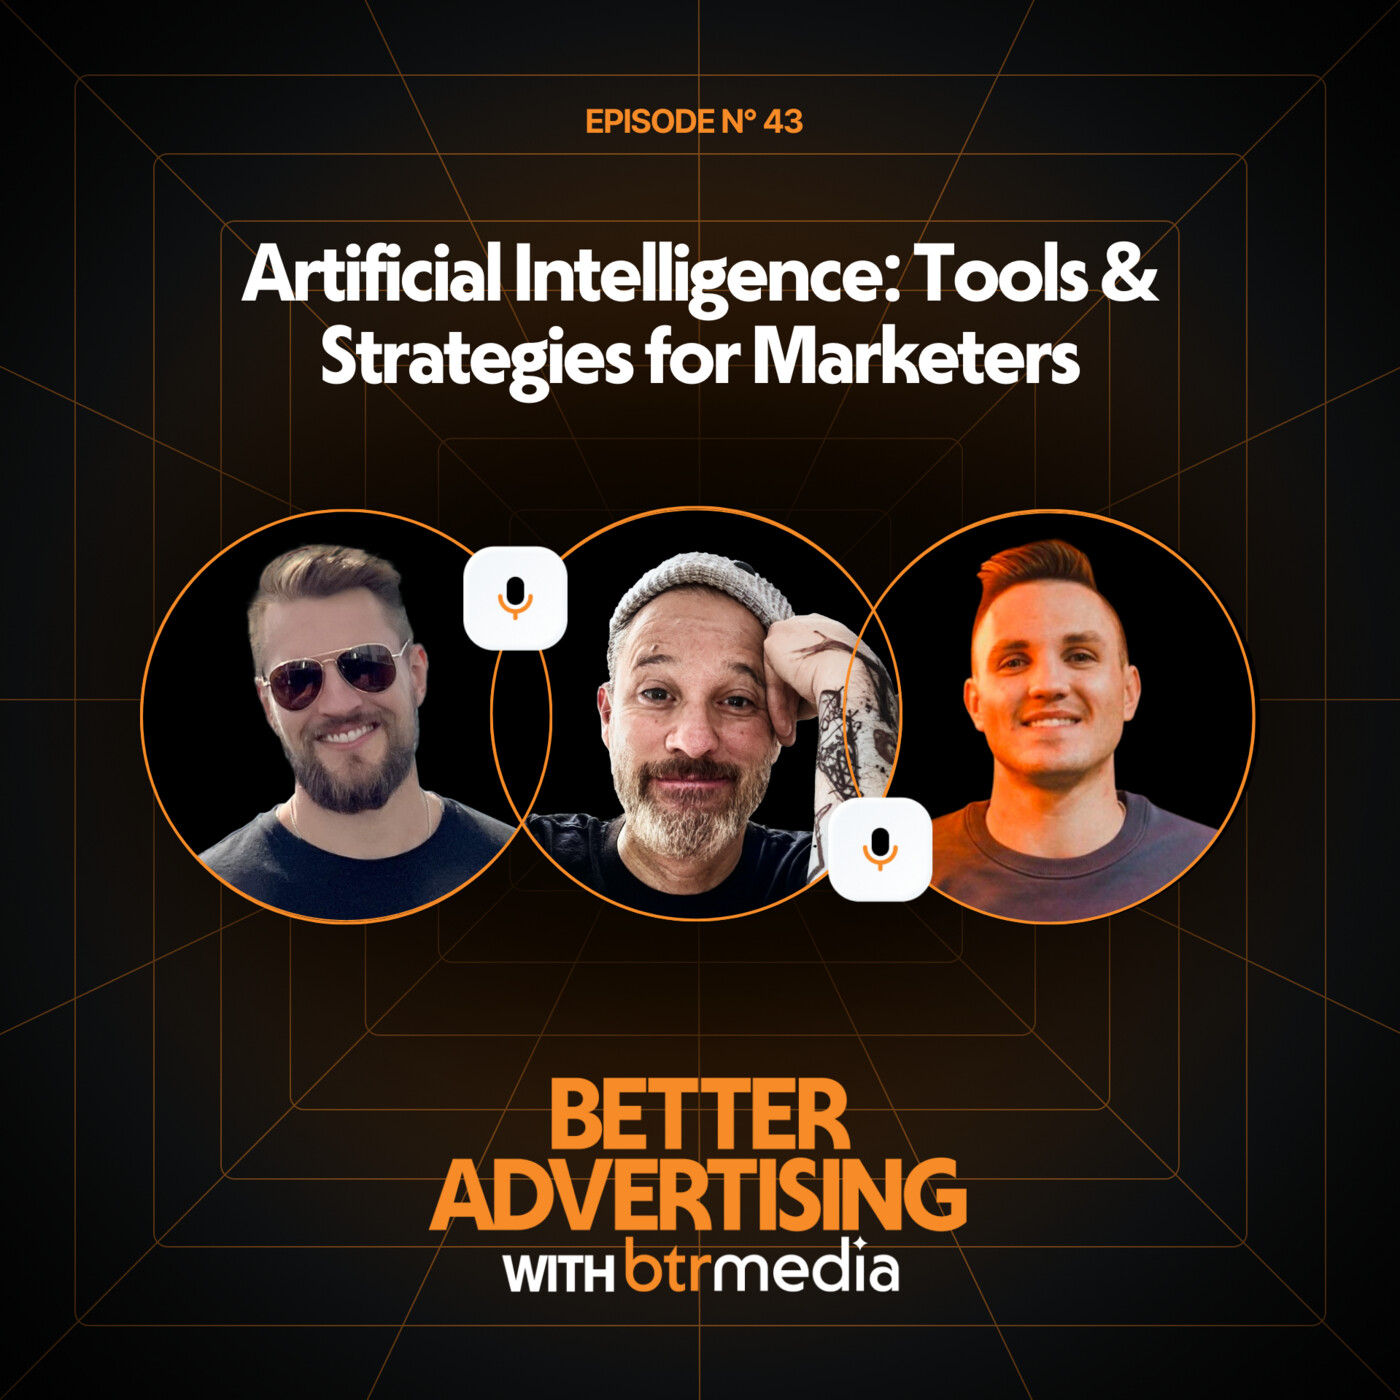 Artificial Intelligence: Tools & Strategies for Marketers